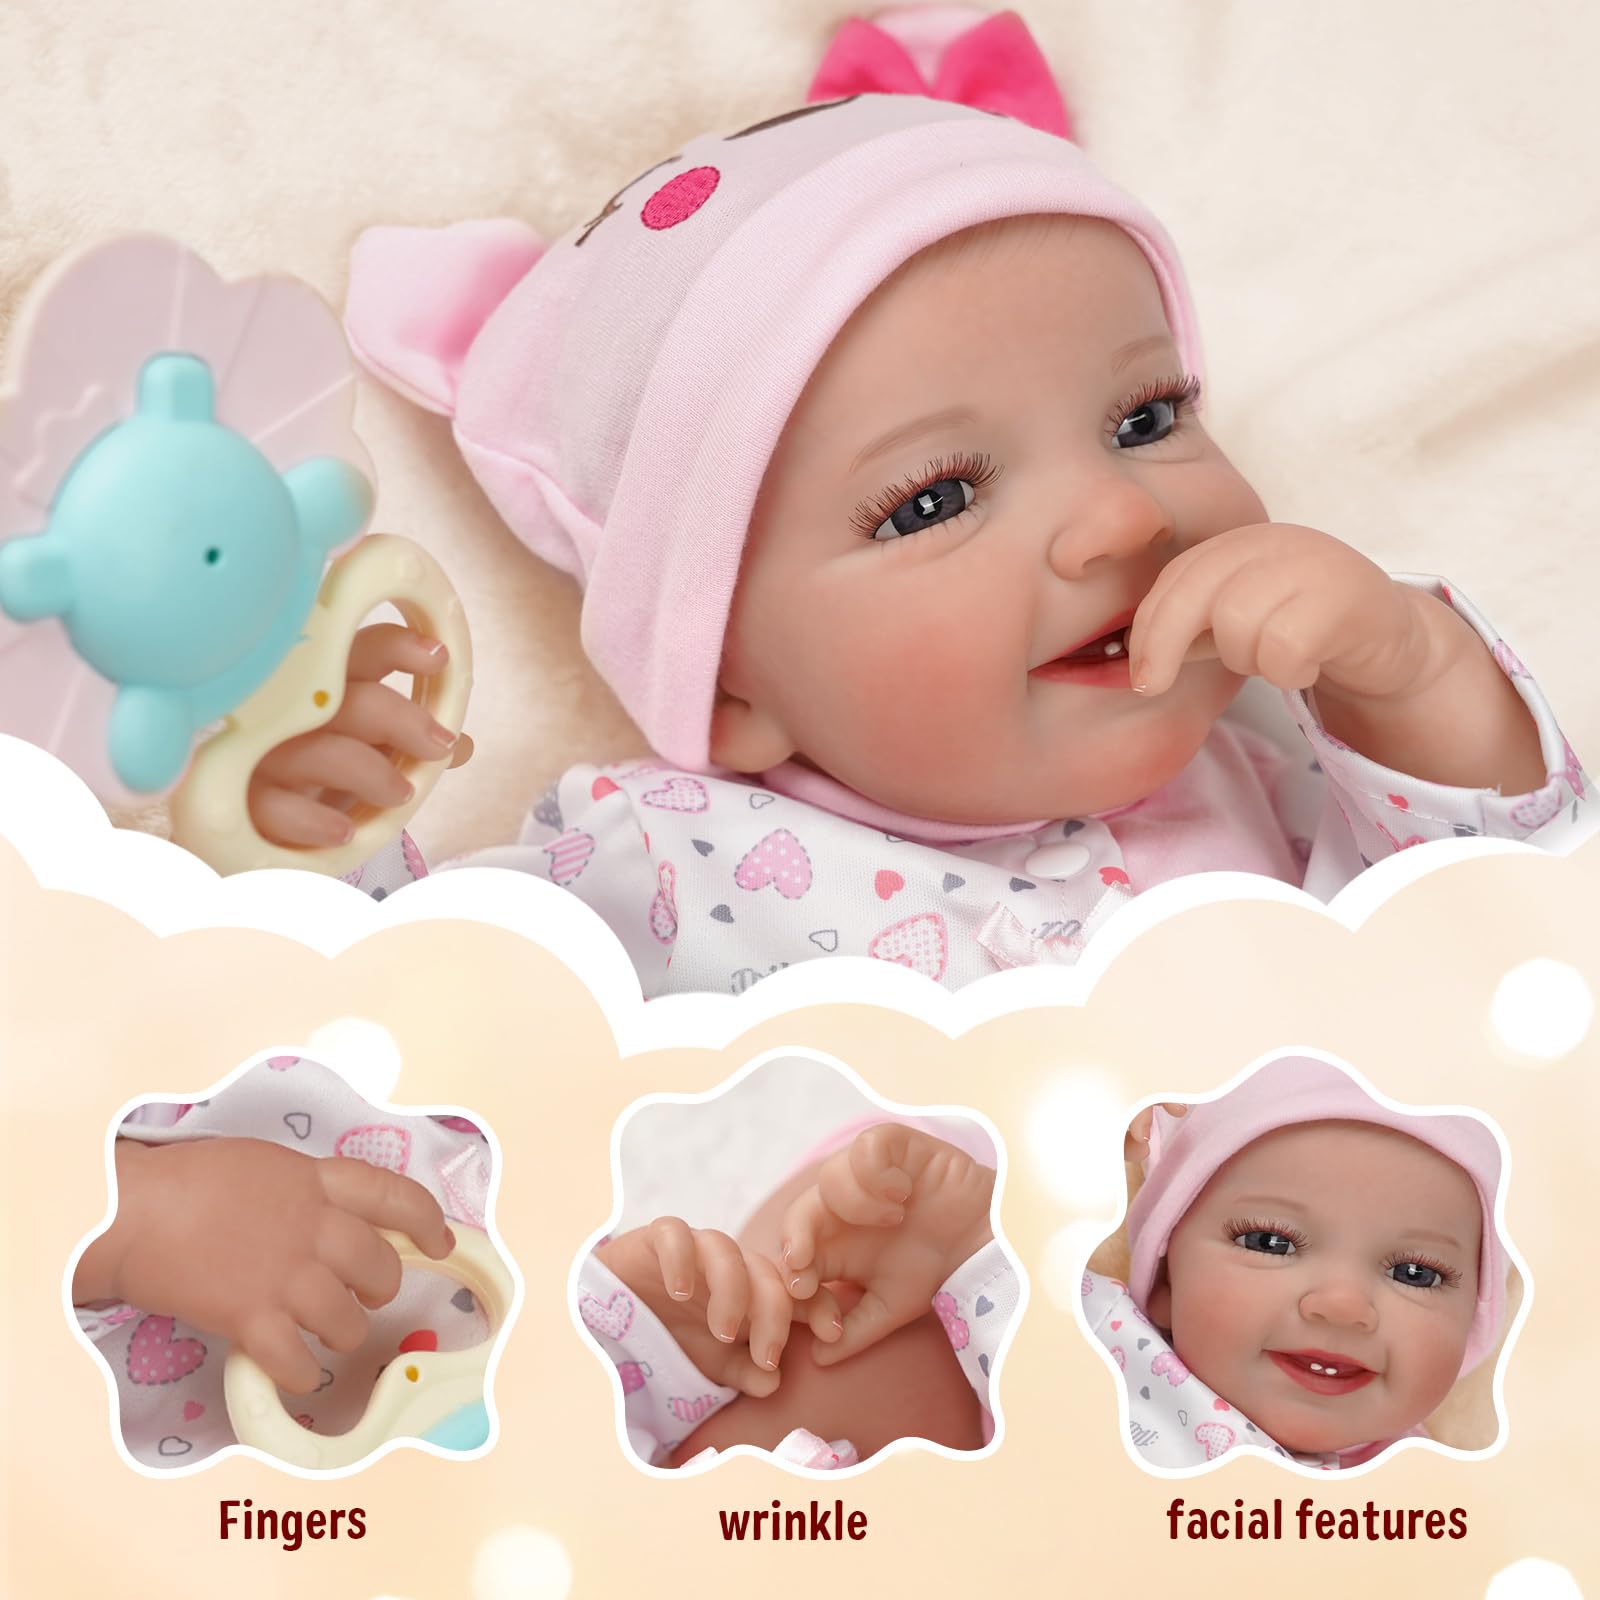 BABESIDE Lifelike Reborn Baby Dolls - 20-Inch Lovely Awake Realistic-Newborn Baby Dolls Soft Cloth Body Real Life Baby Dolls Girl with Feeding Kids for Kids Playing Birthday Gifts & Collection